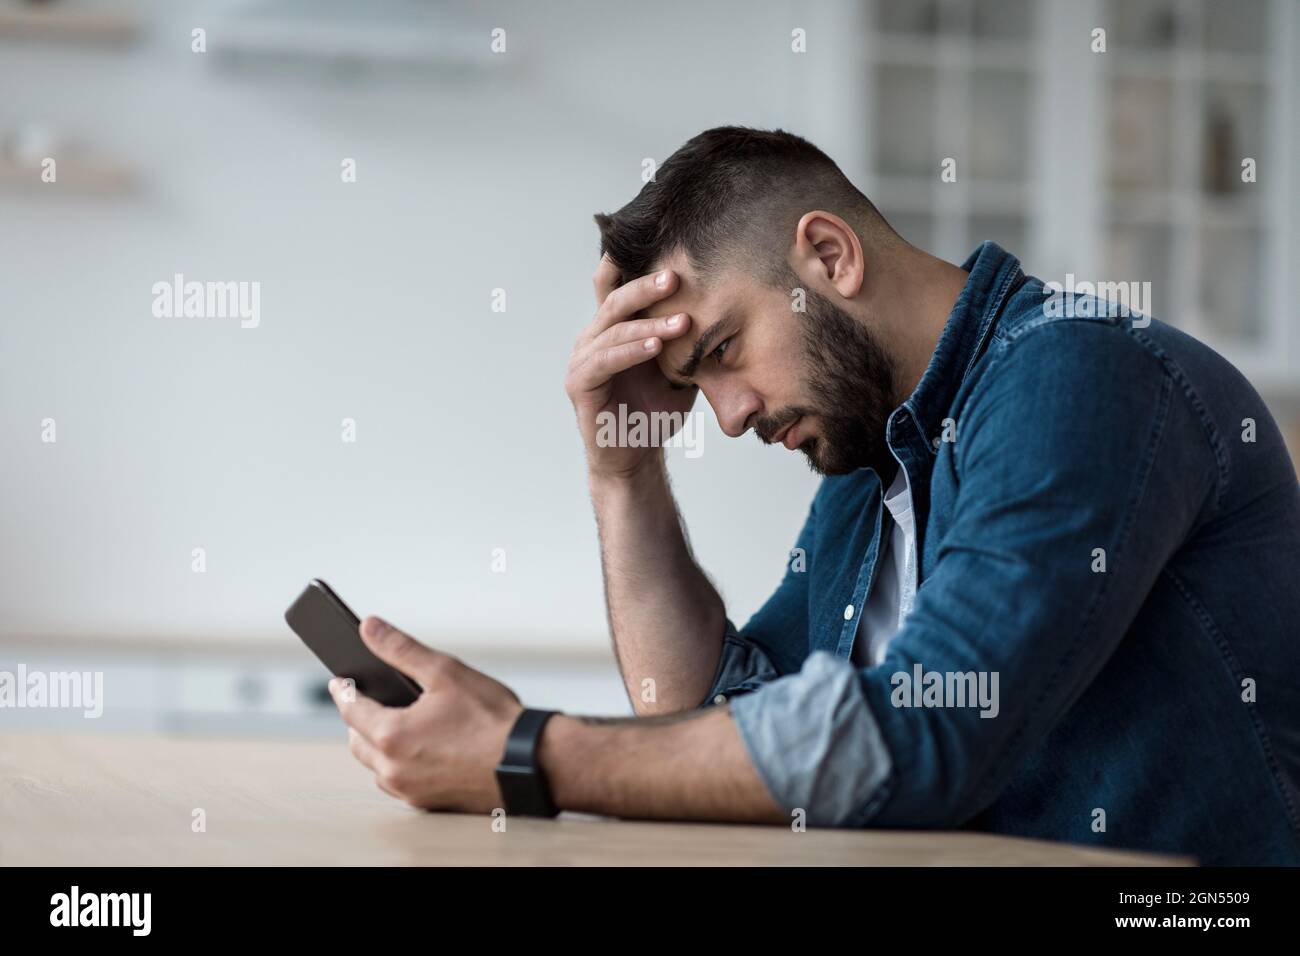 Waiting for call, problems and difficulties, stress and no answer Stock Photo